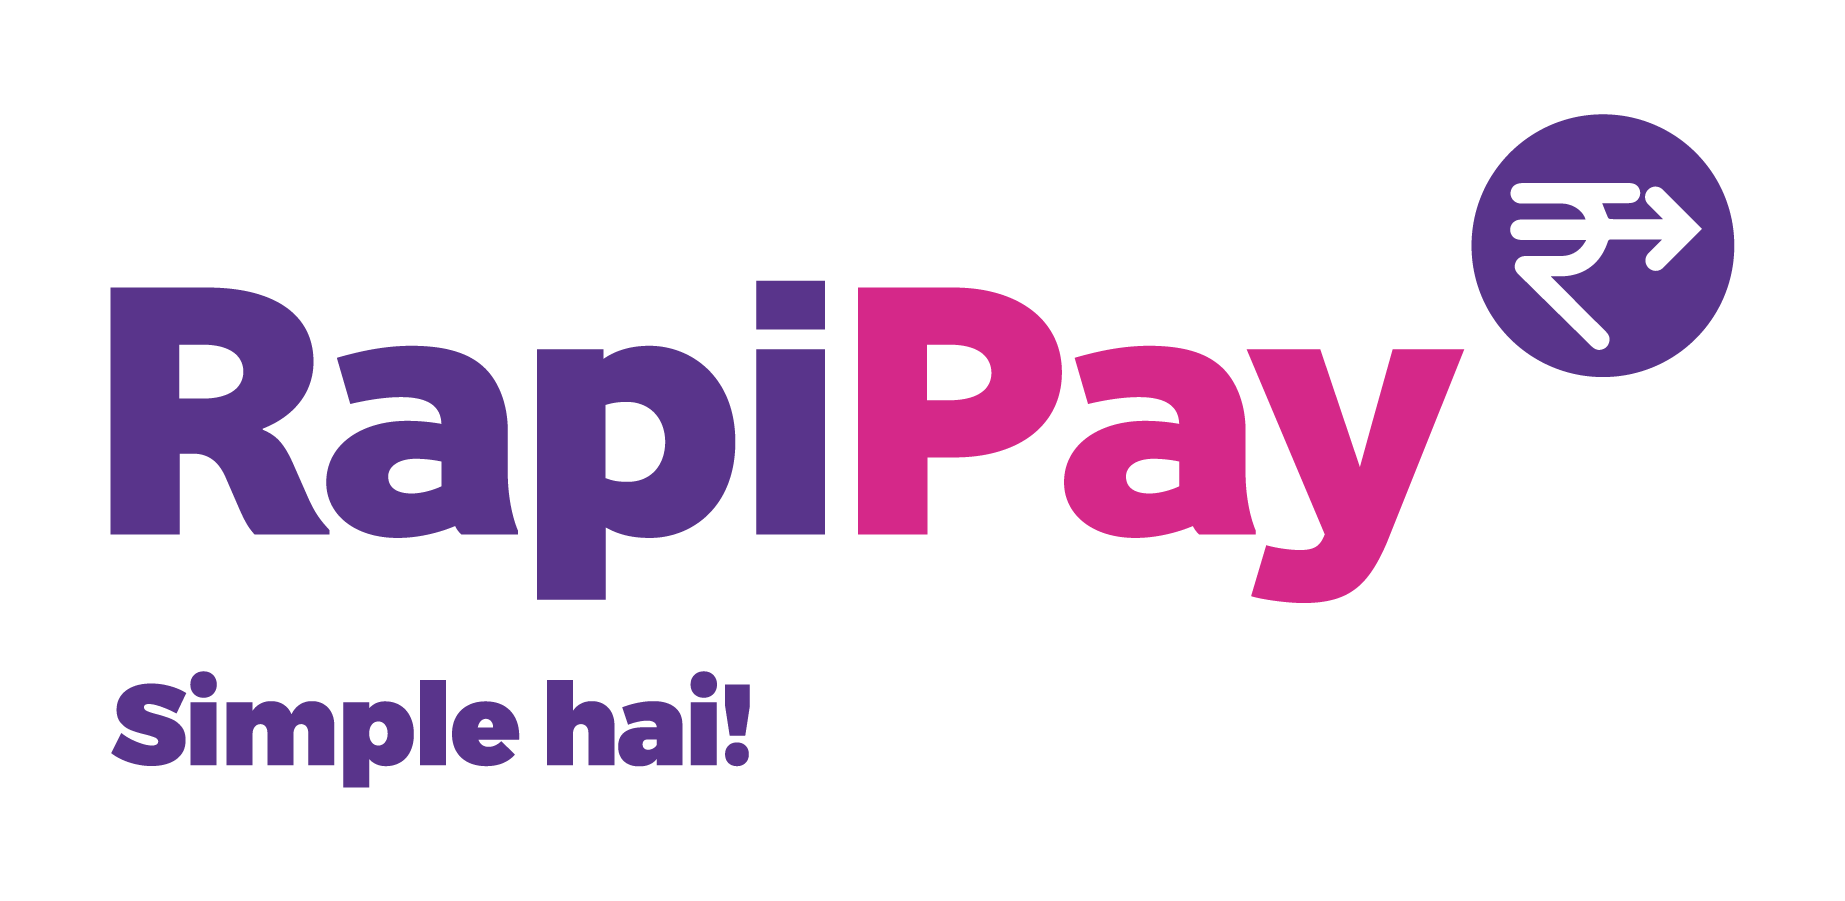 RapiPay launches De Dhana Dhan Offer, agents across India are winning TVs, Smart phones, Cashback prizes